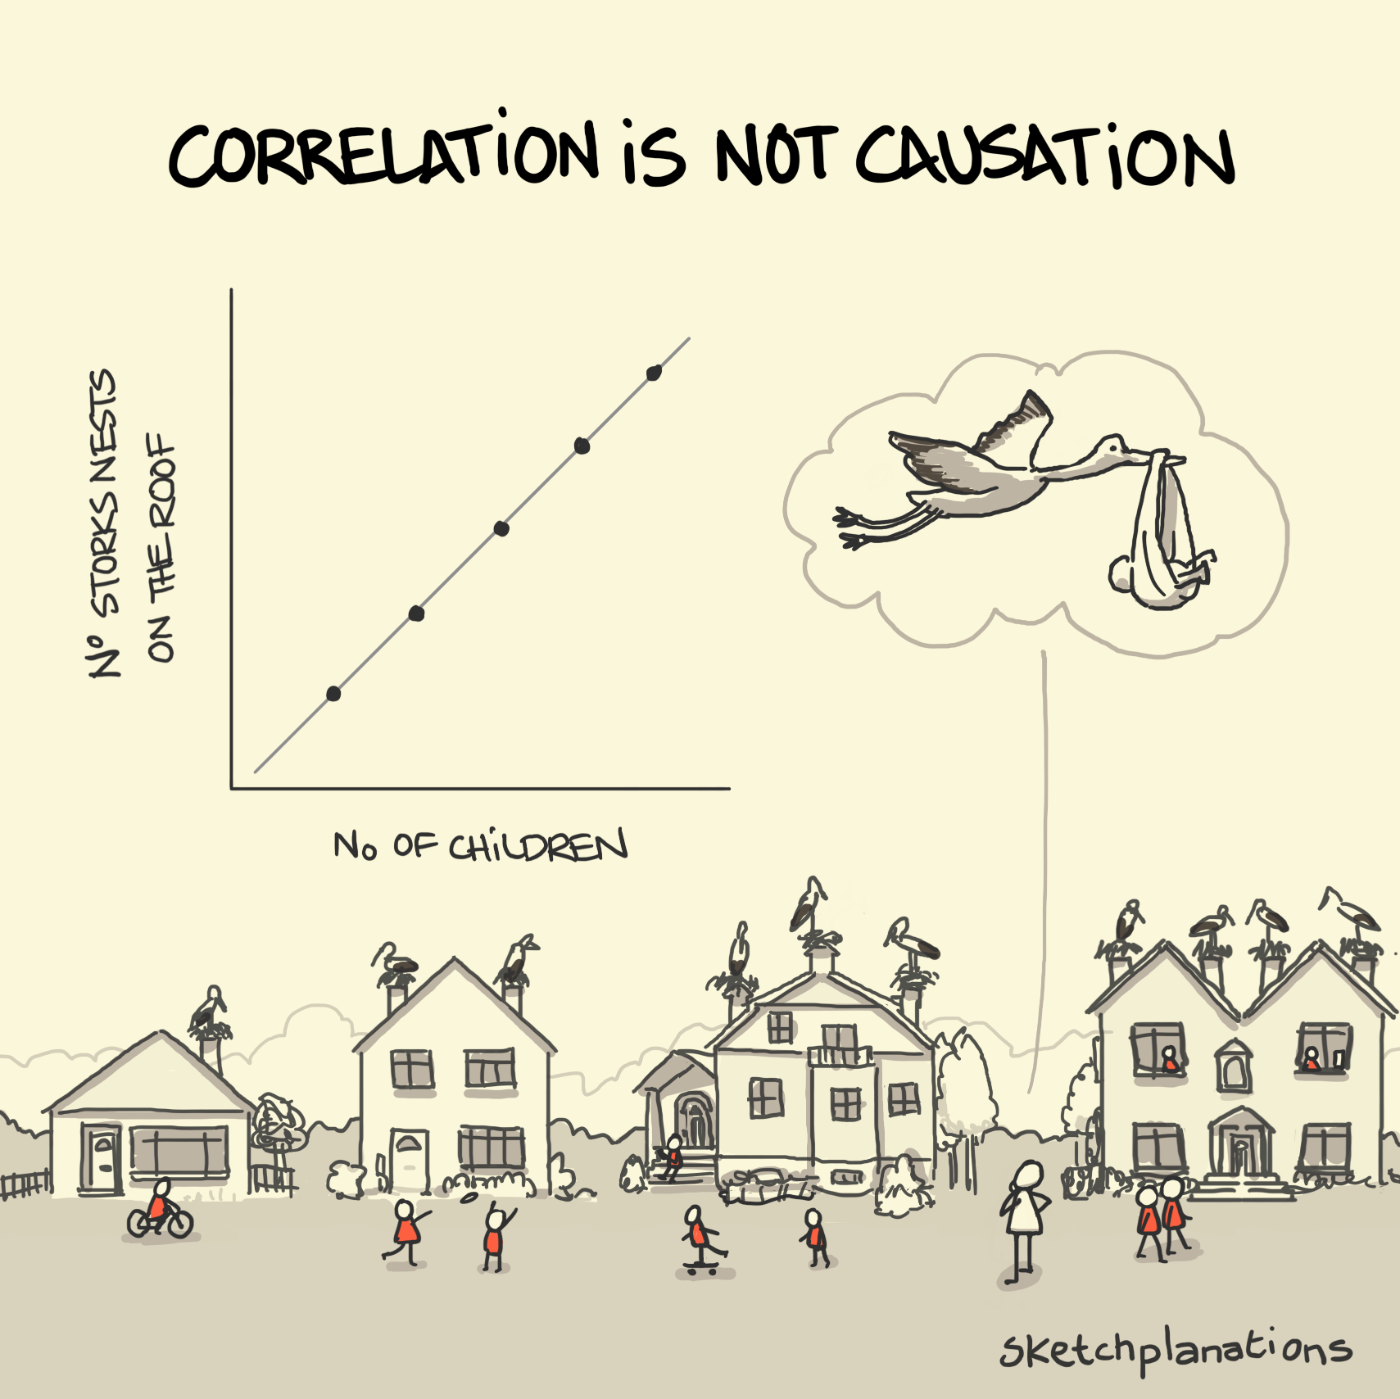 Causation is not correlation - Sketchplanations